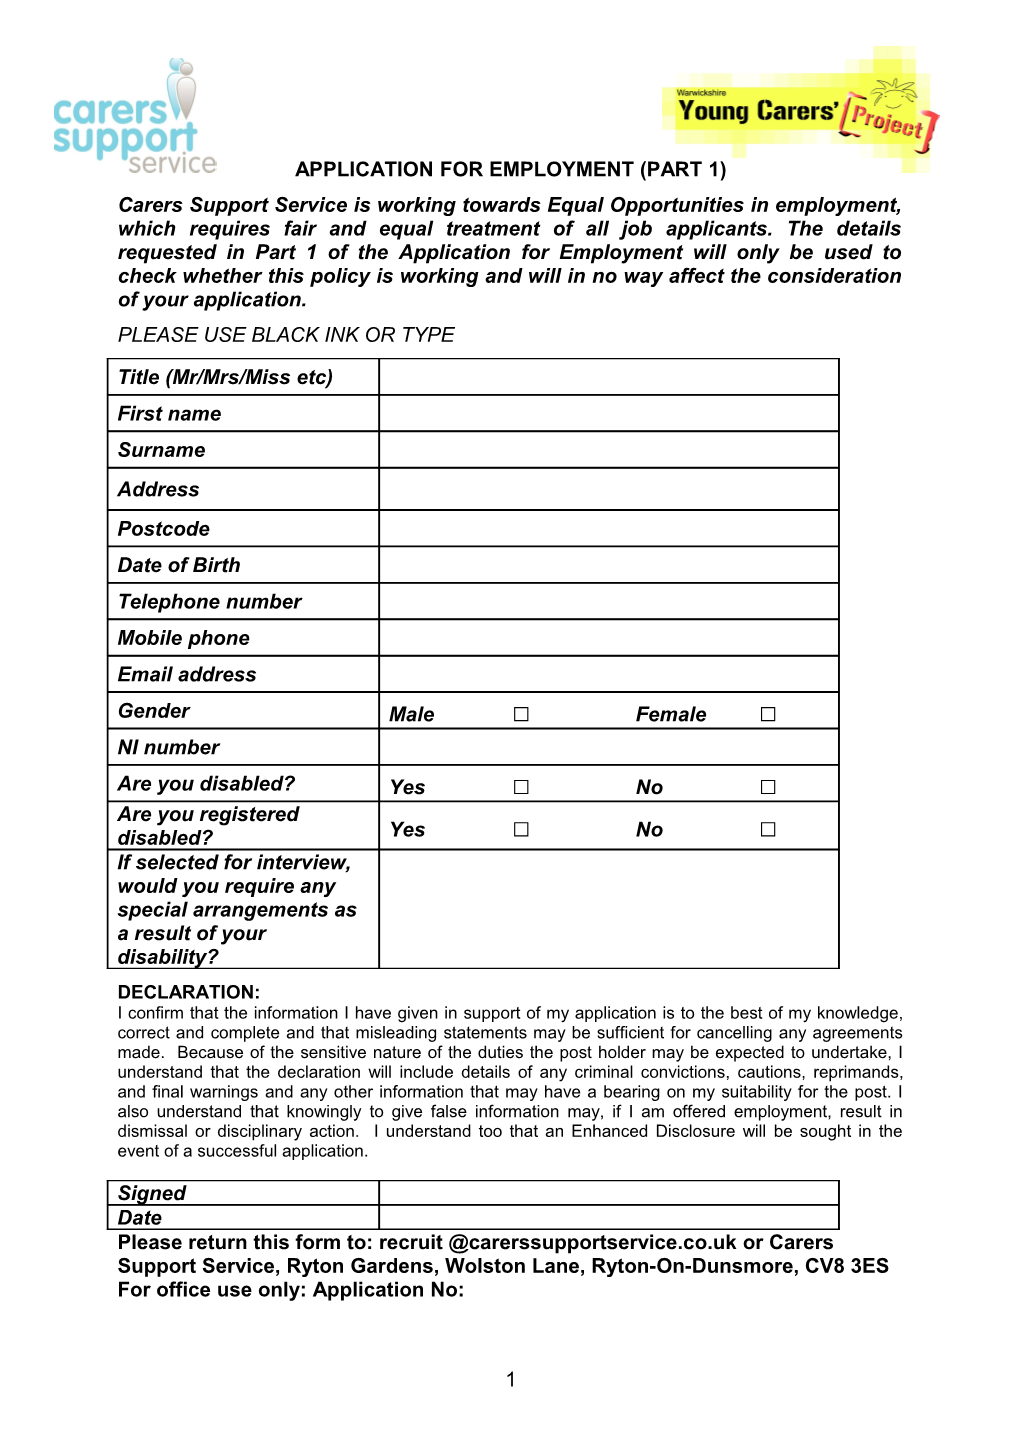 Application for Employment (Part 1)